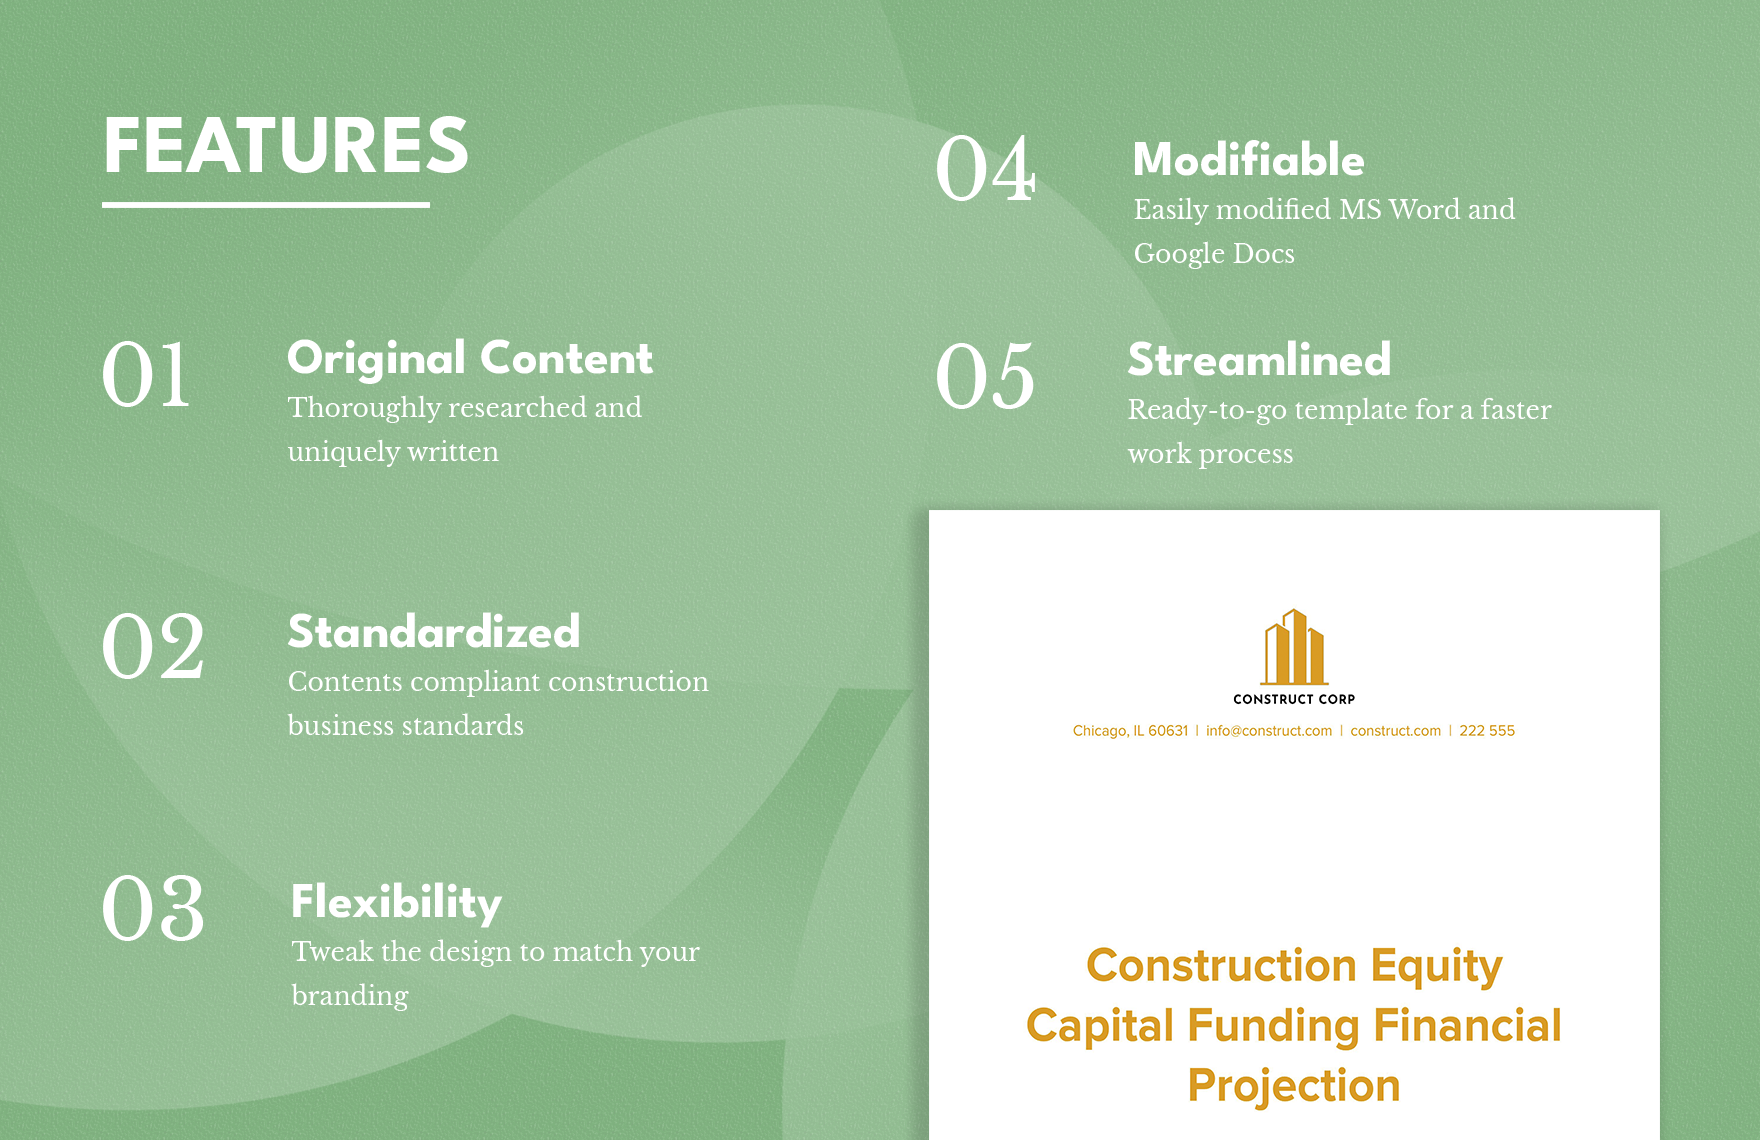 Construction Equity Capital Funding